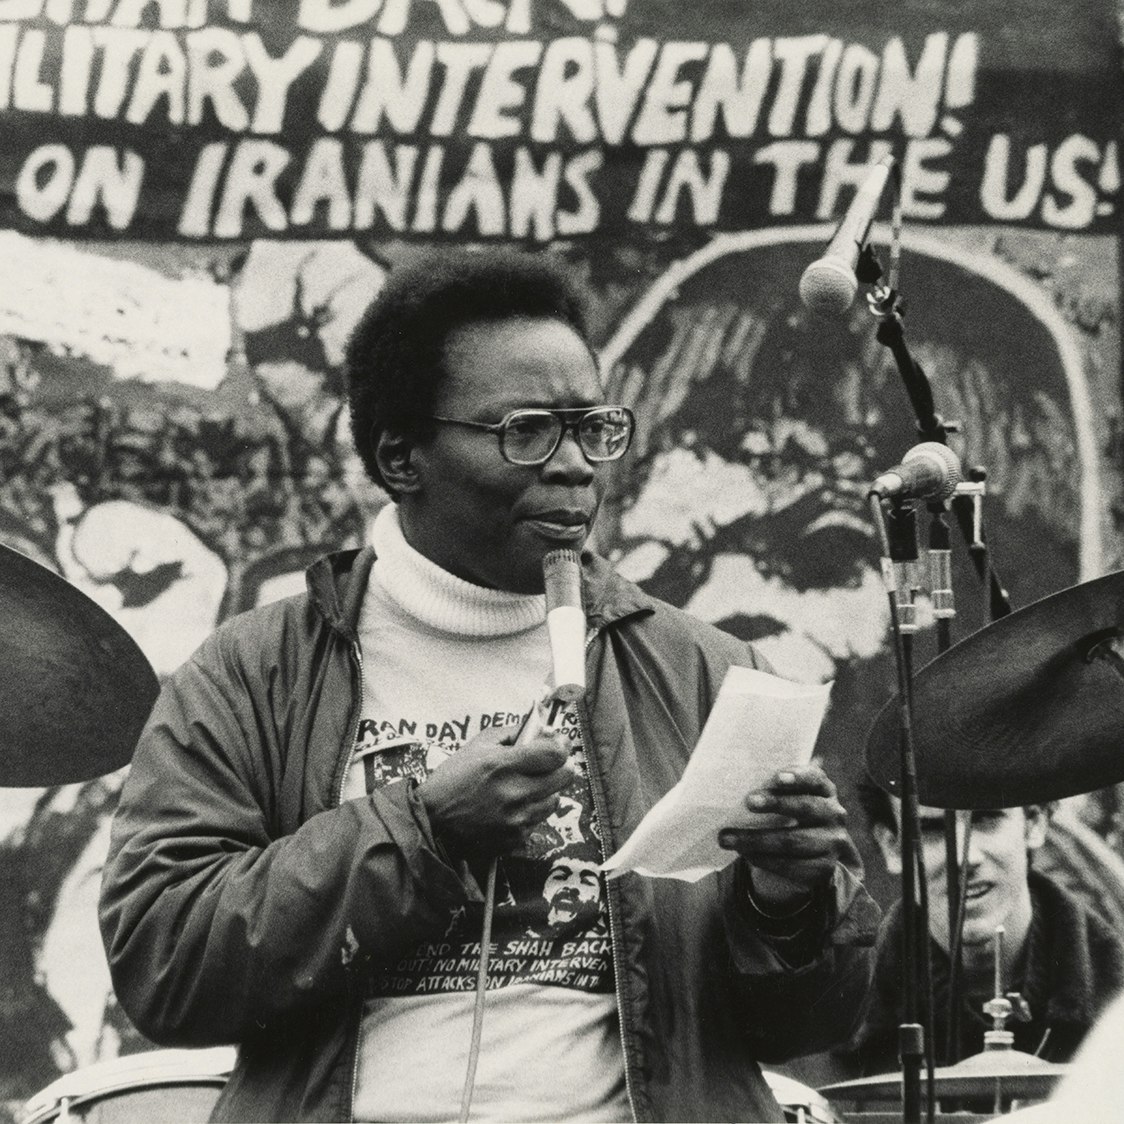 Image of Pat Parker speaking at a rally